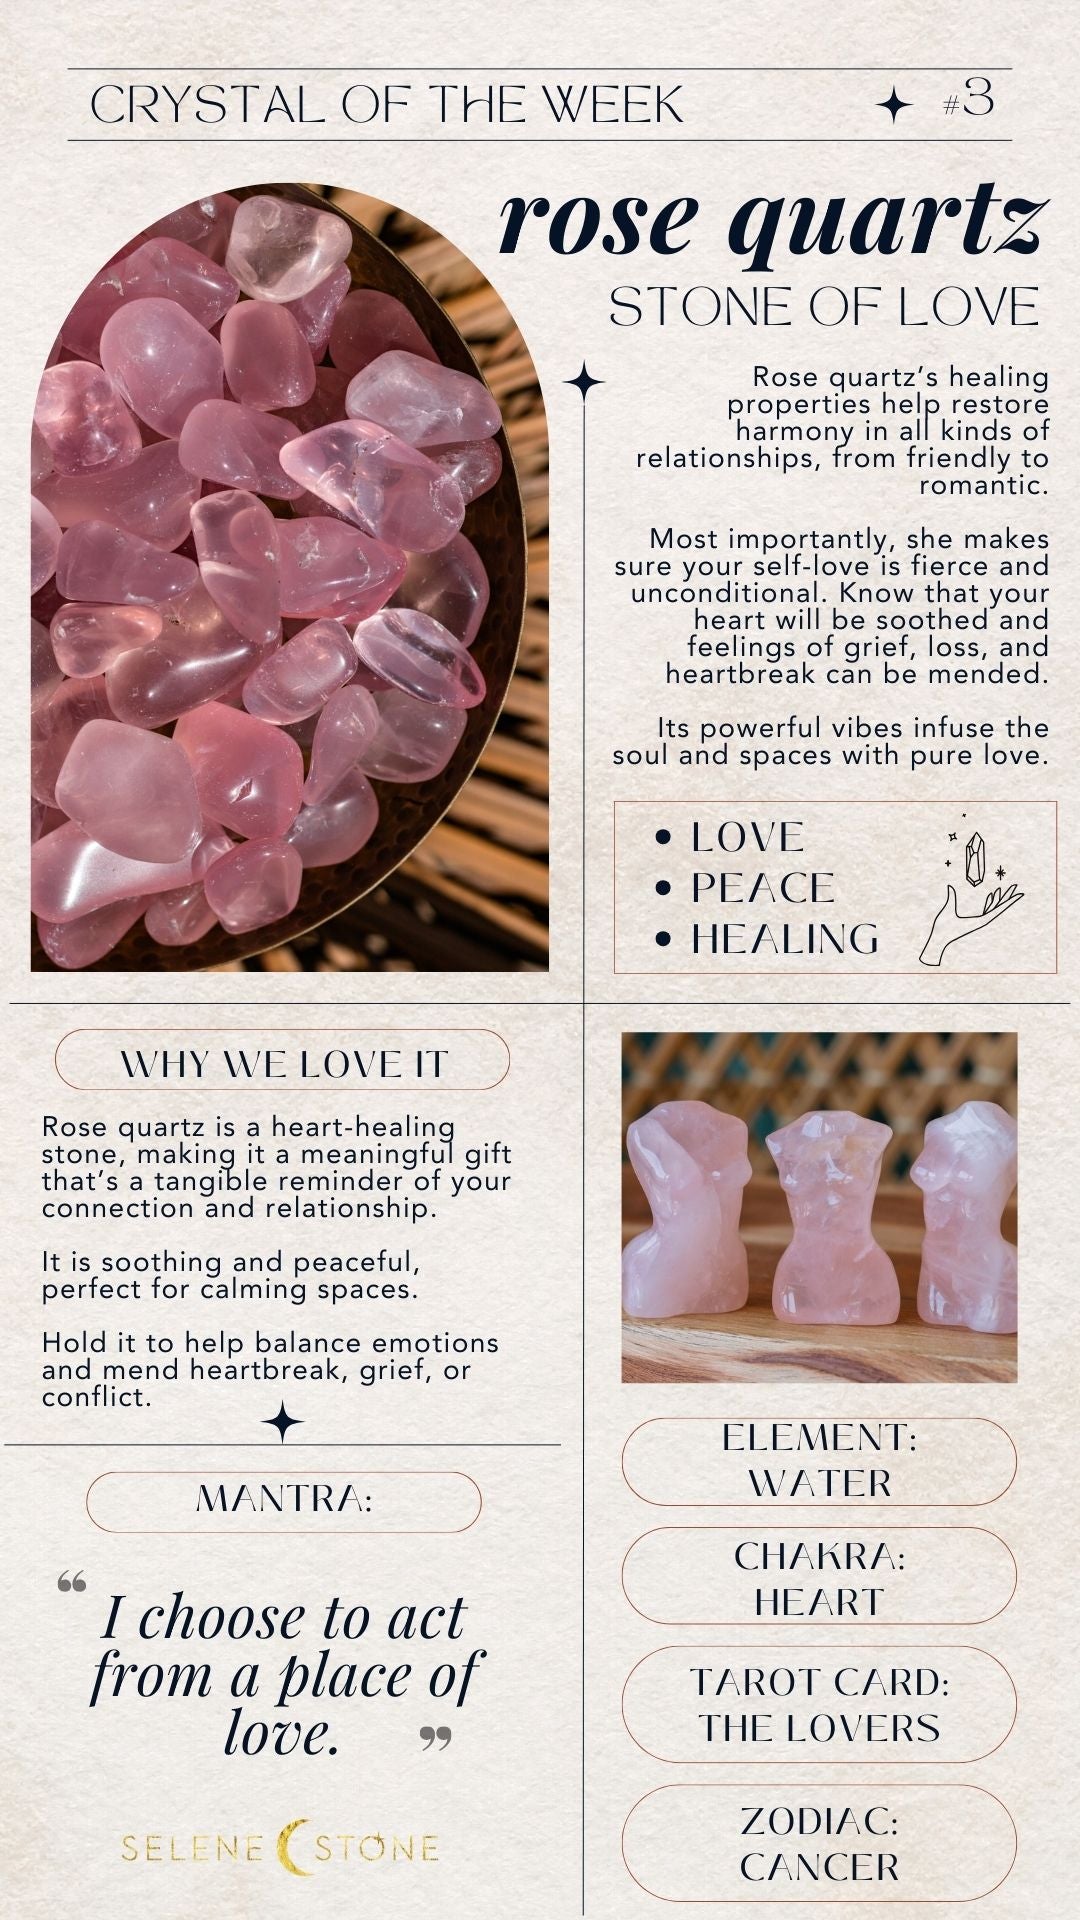 stone of love: rose quartz crystal healing benefits for the heart chakra